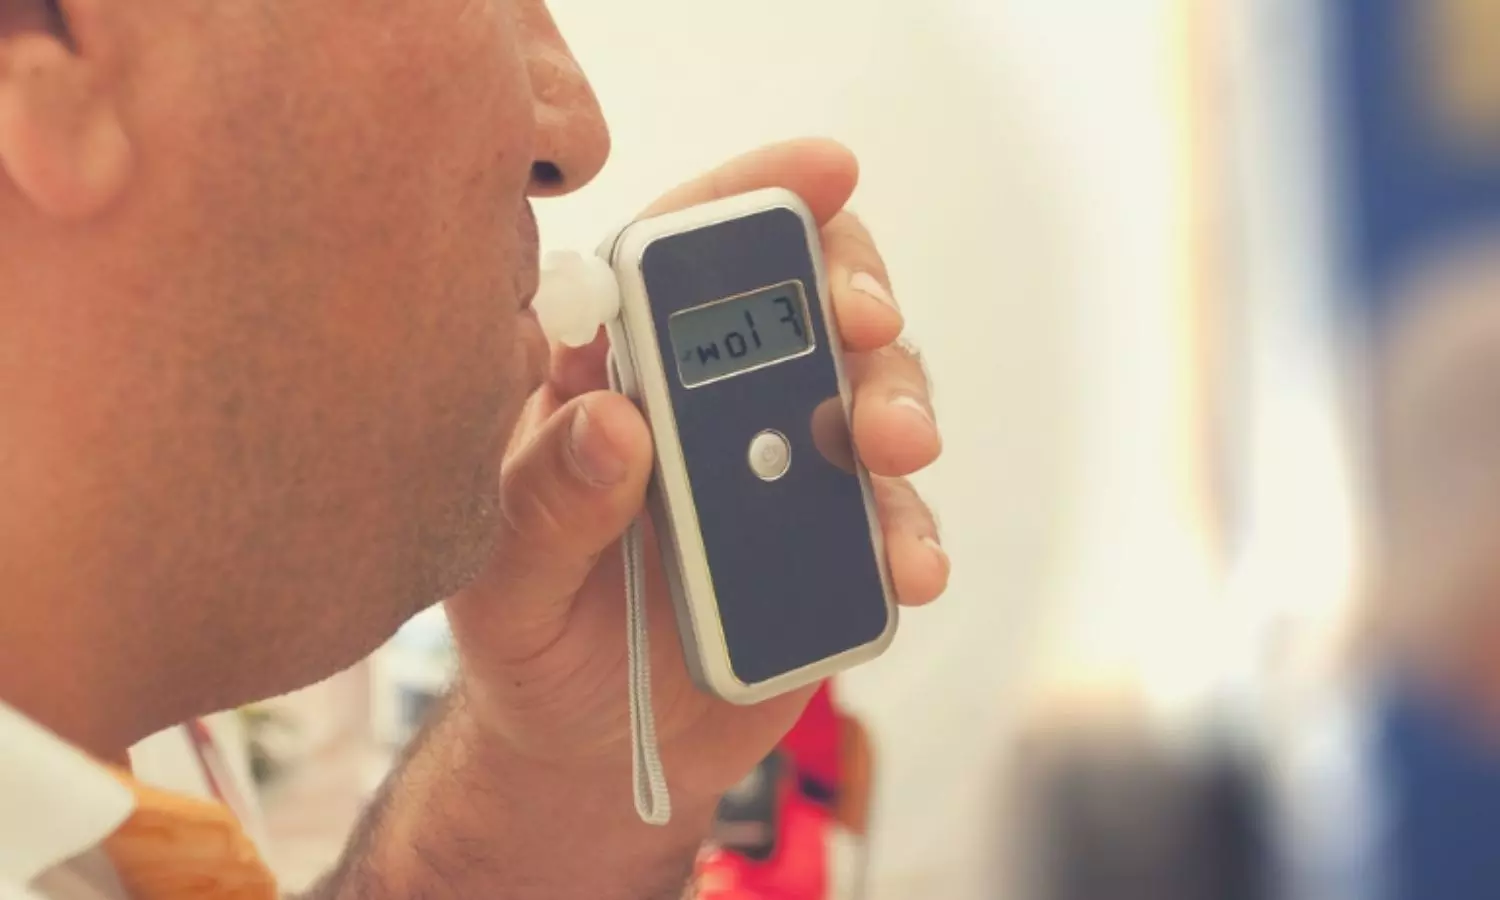 Breath ketone analyzers  non-invasively detect ketosis in adults with type 1 diabetes: Study